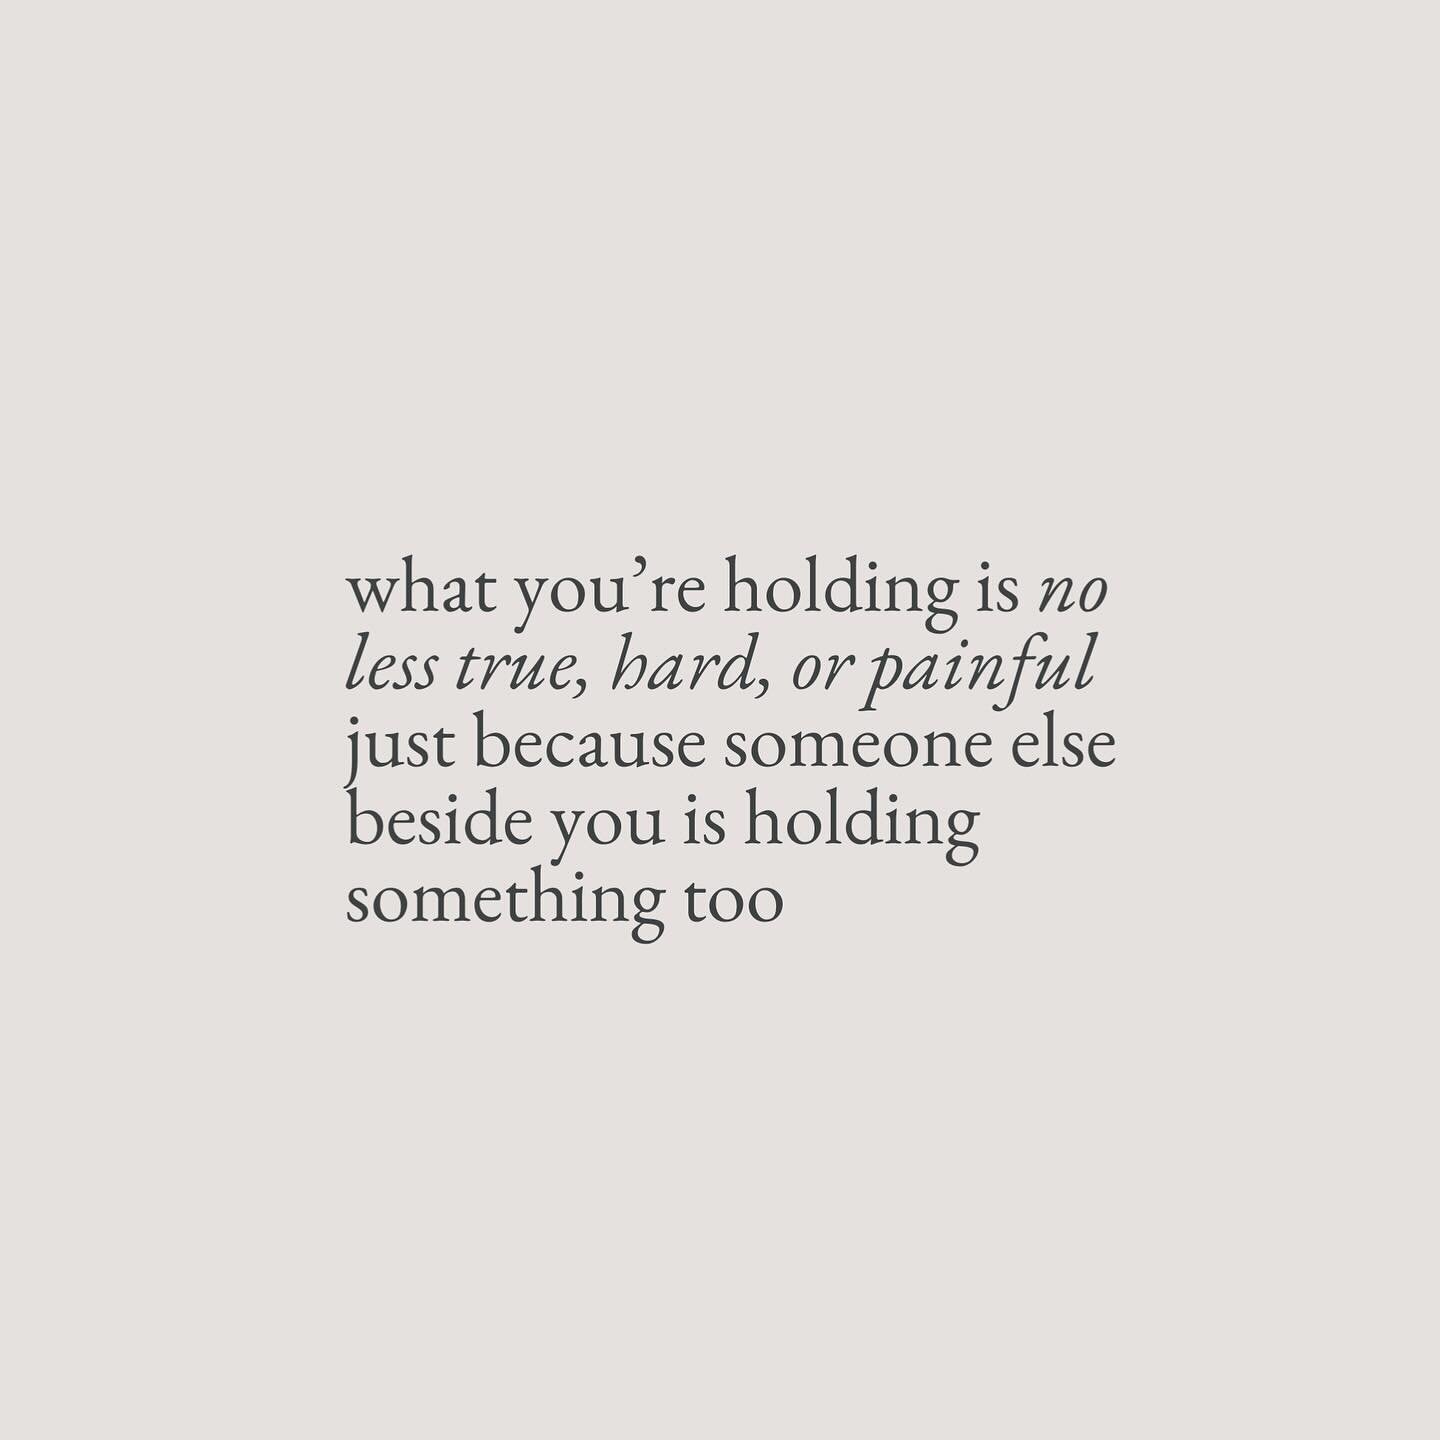 Here&rsquo;s the thing, what you&rsquo;re holding is no less true, hard, or painful just because someone else beside you is holding something too. Theirs may appear bigger, but you may feel yours more. Theirs may appear smaller, but they no longer ha